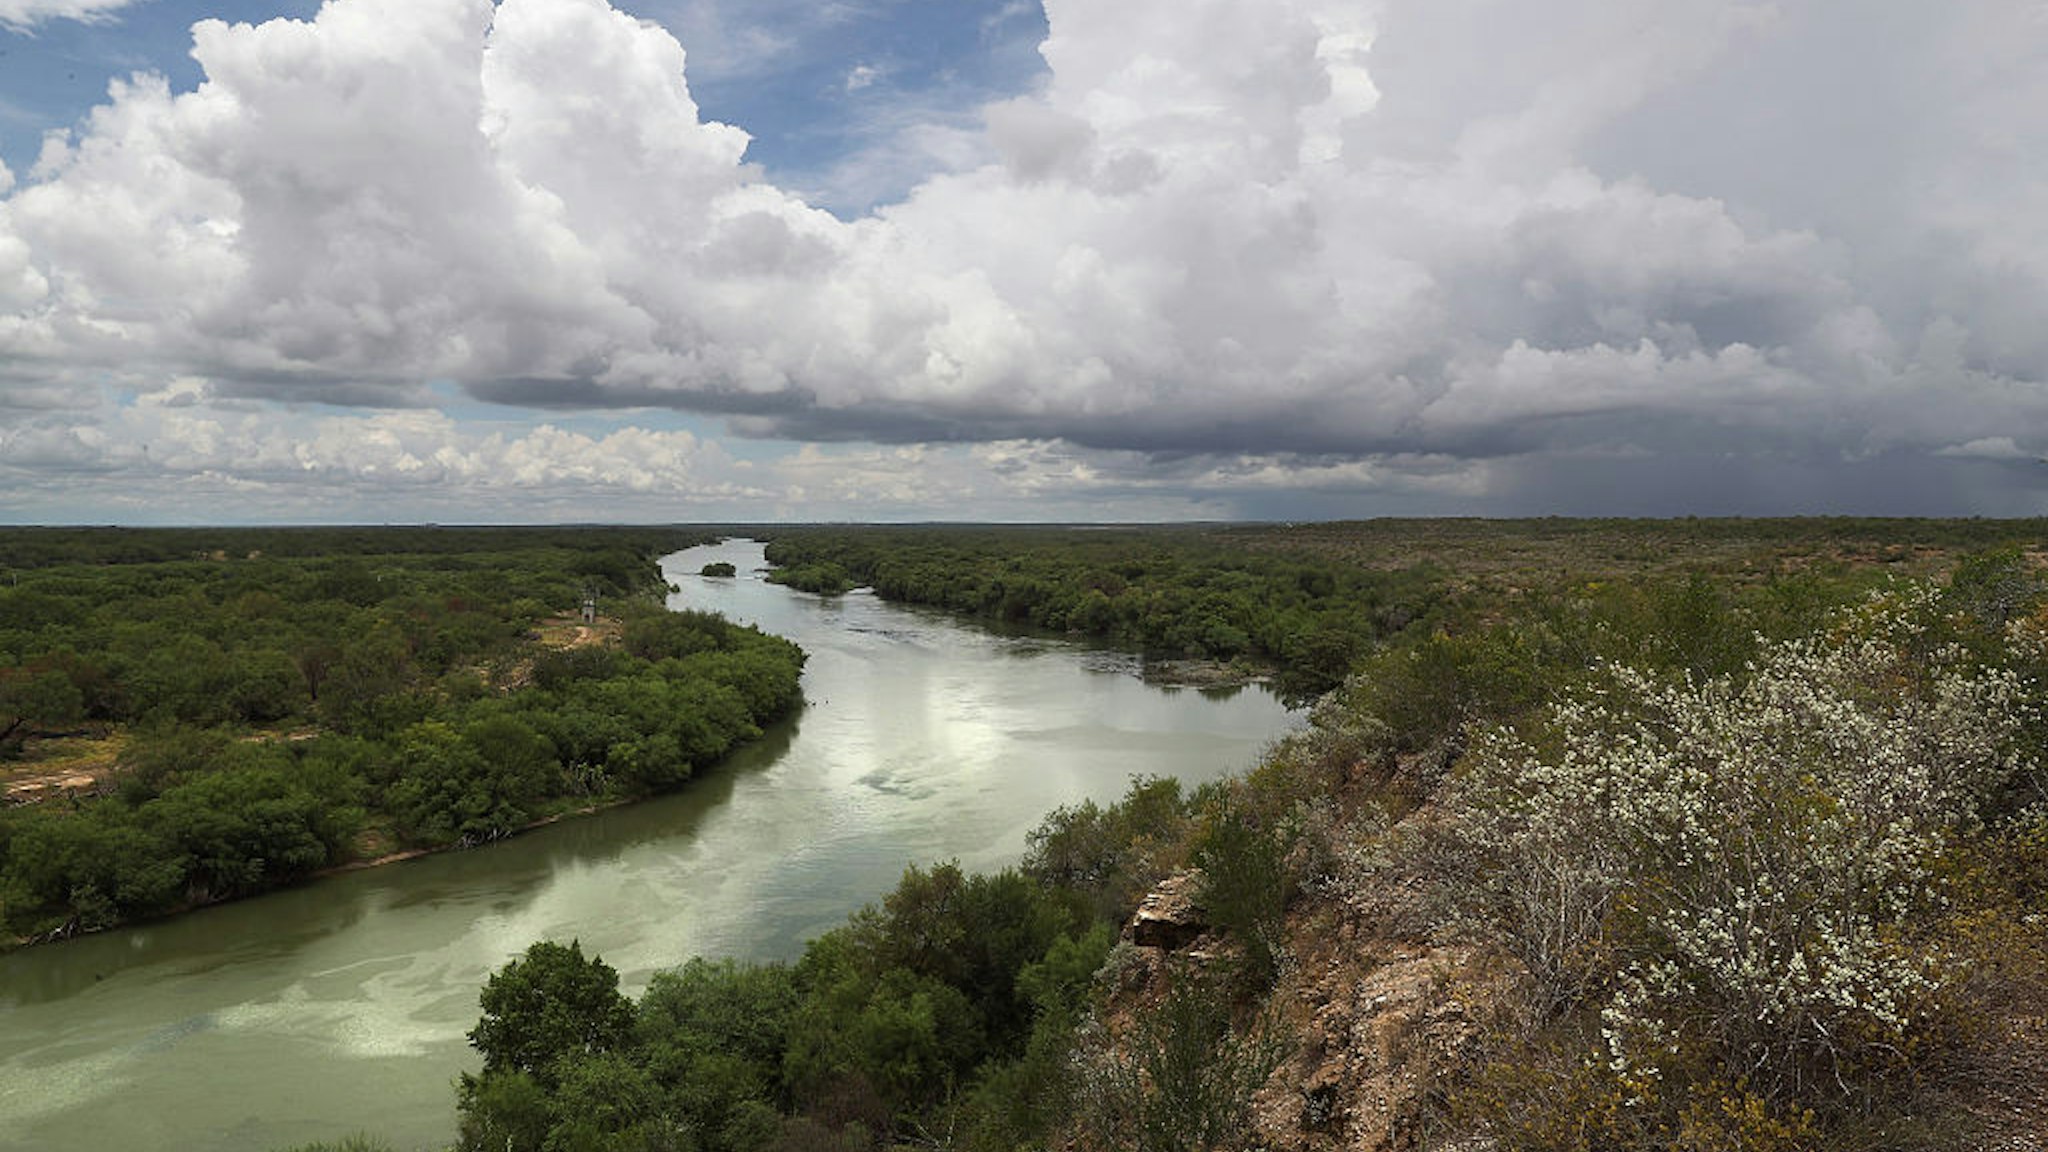 ROMA, TX - AUGUST 16: The Rio Grande flows along the U.S.-Mexico border on August 16, 2016 near Roma, Texas. Border security has become a main issue in the U.S. Presidential campaign, as Republican Presidential candidate Donald Trump has promised to build a wall, at Mexico's expense to fortify the U.S.-Mexico border.